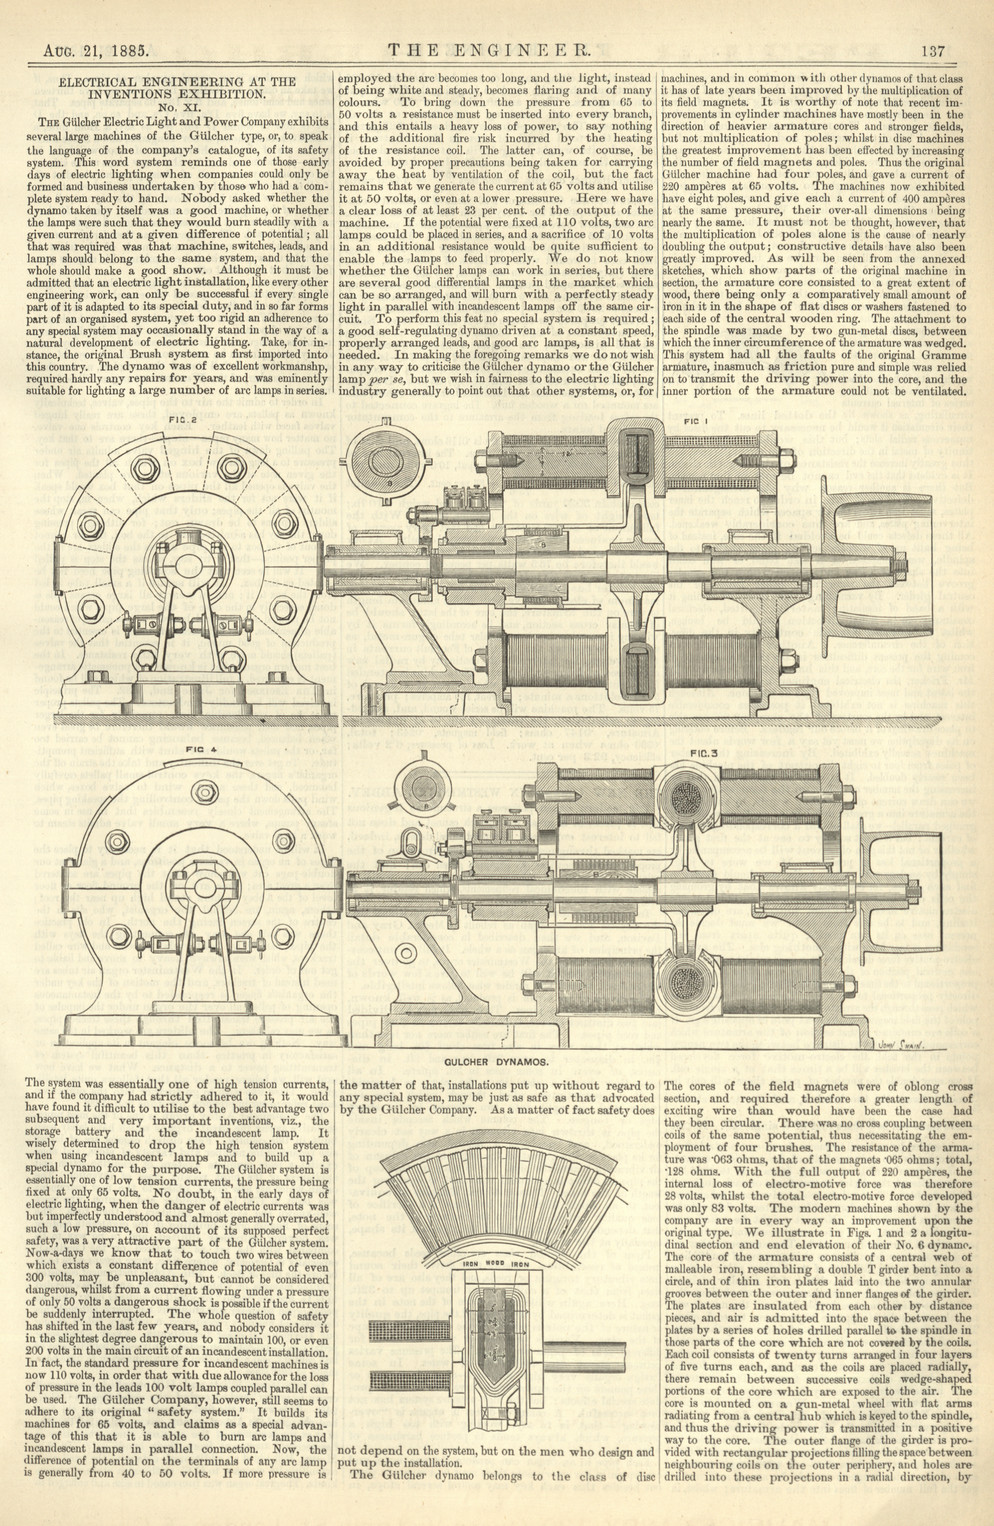 The Engineer, Vol.60, 21 August